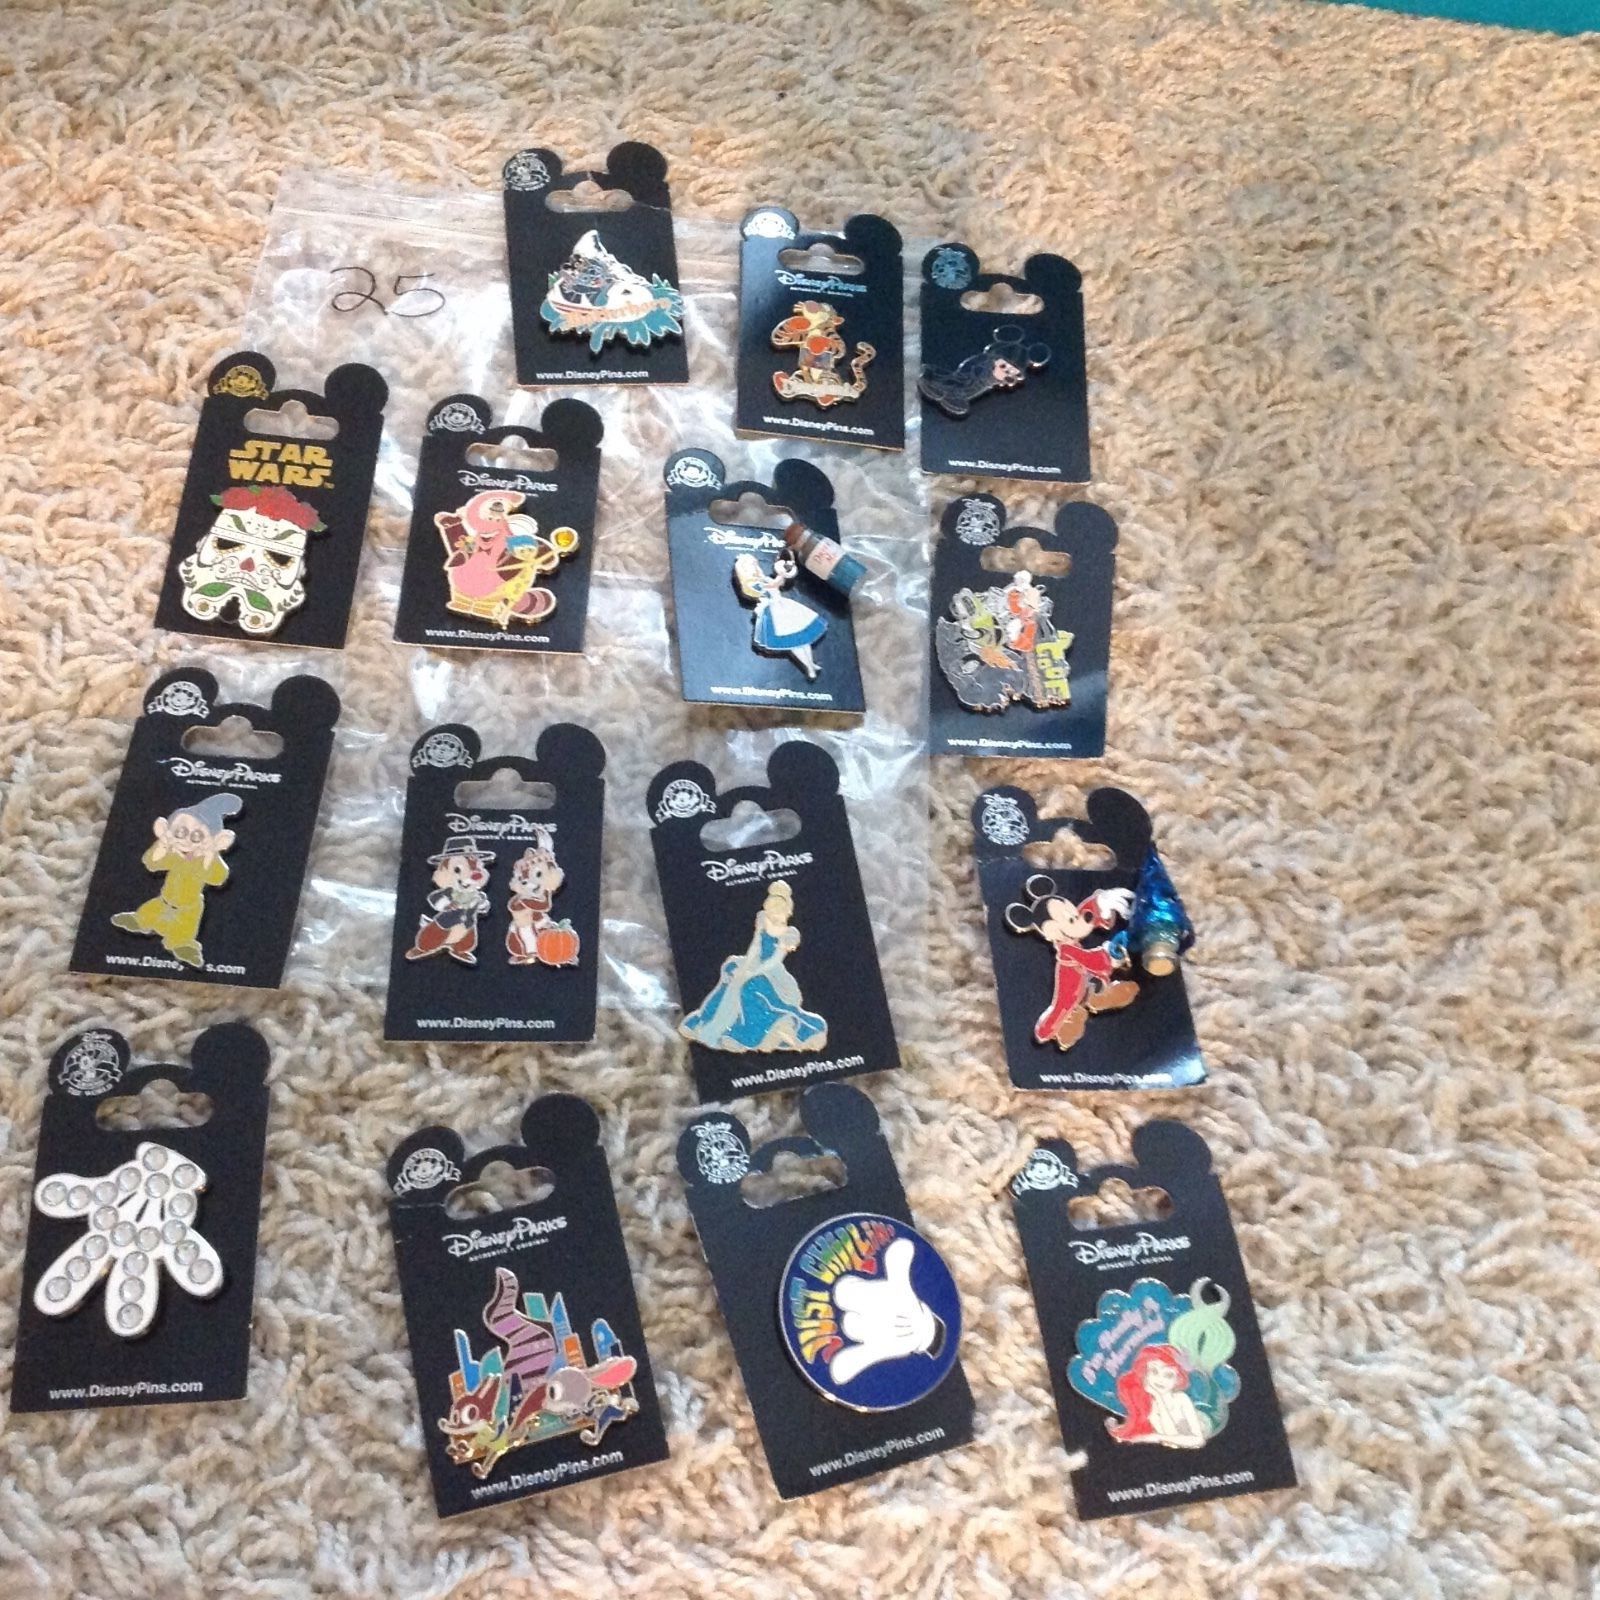 New Authentic Disney pin lot of 15 Pins #25 -- Antique Price Guide ...